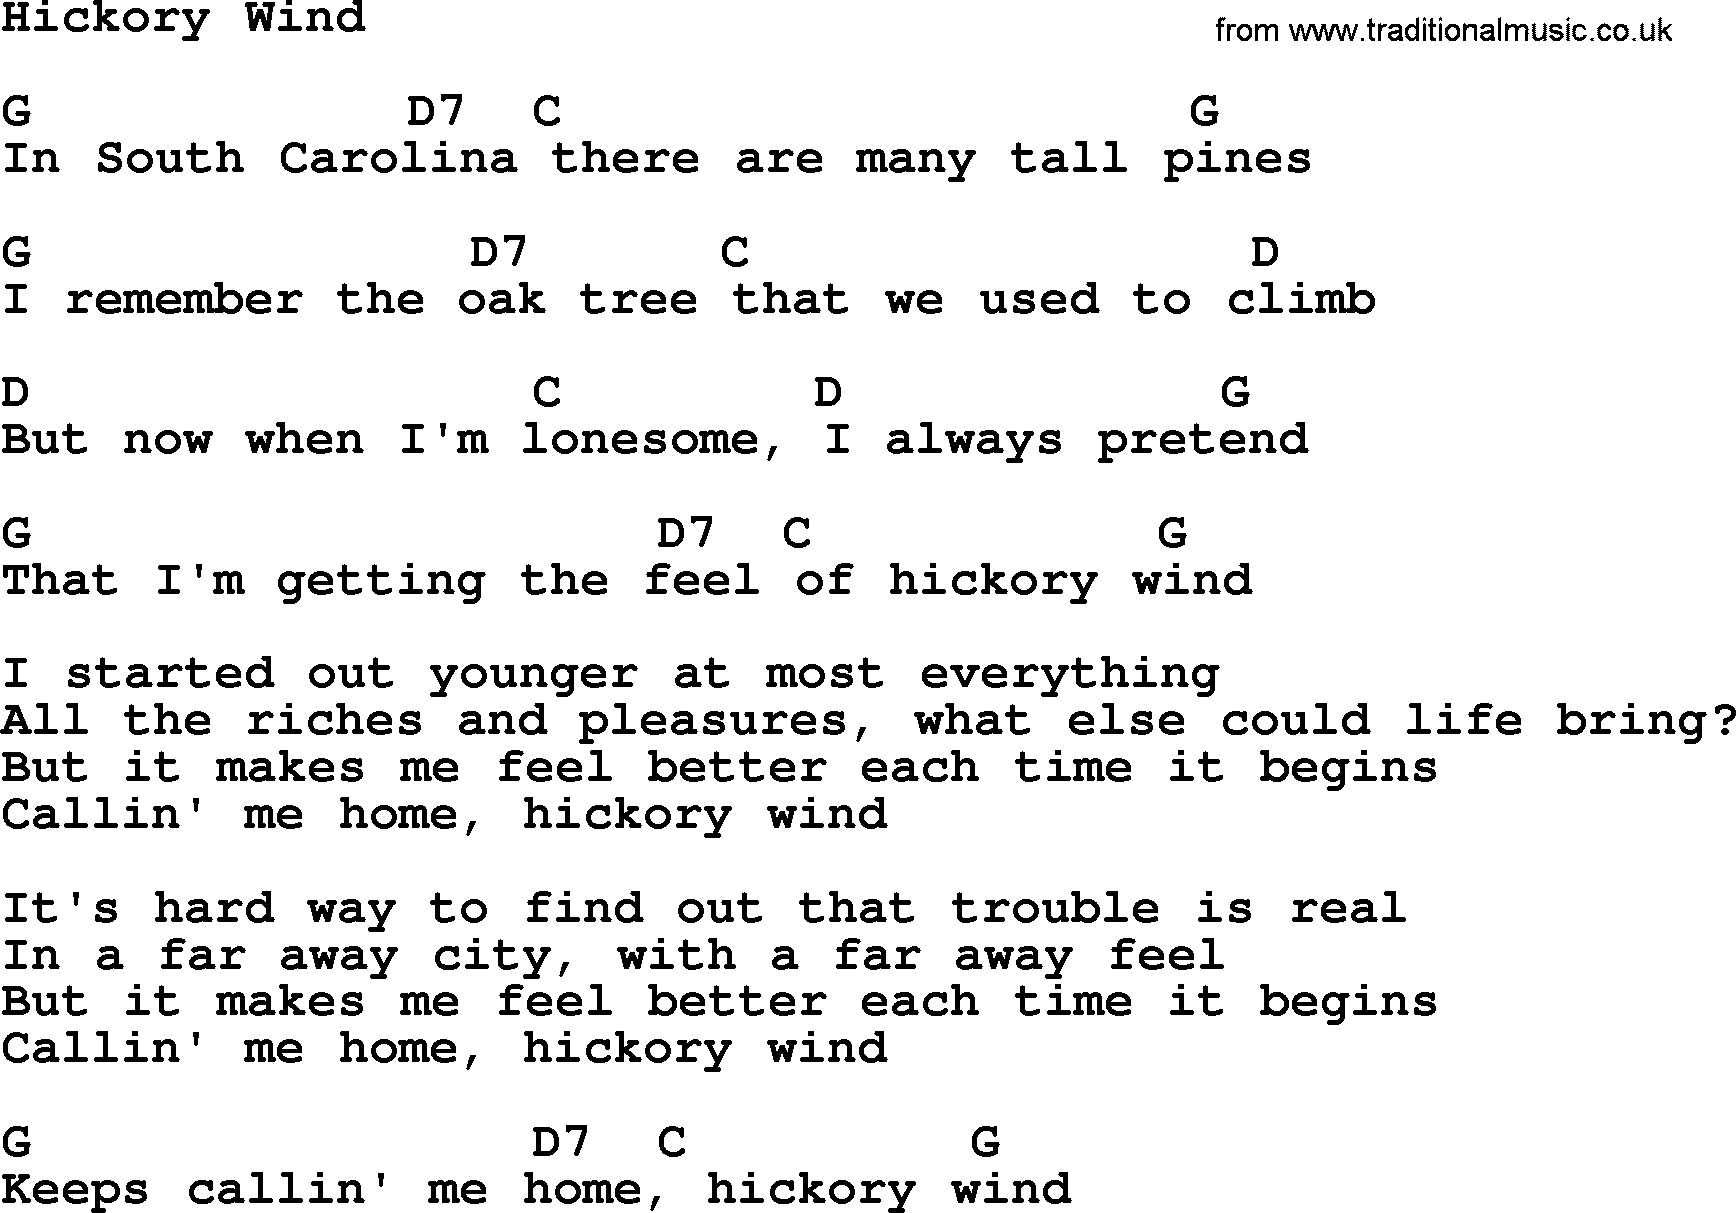 Bluegrass song: Hickory Wind, lyrics and chords